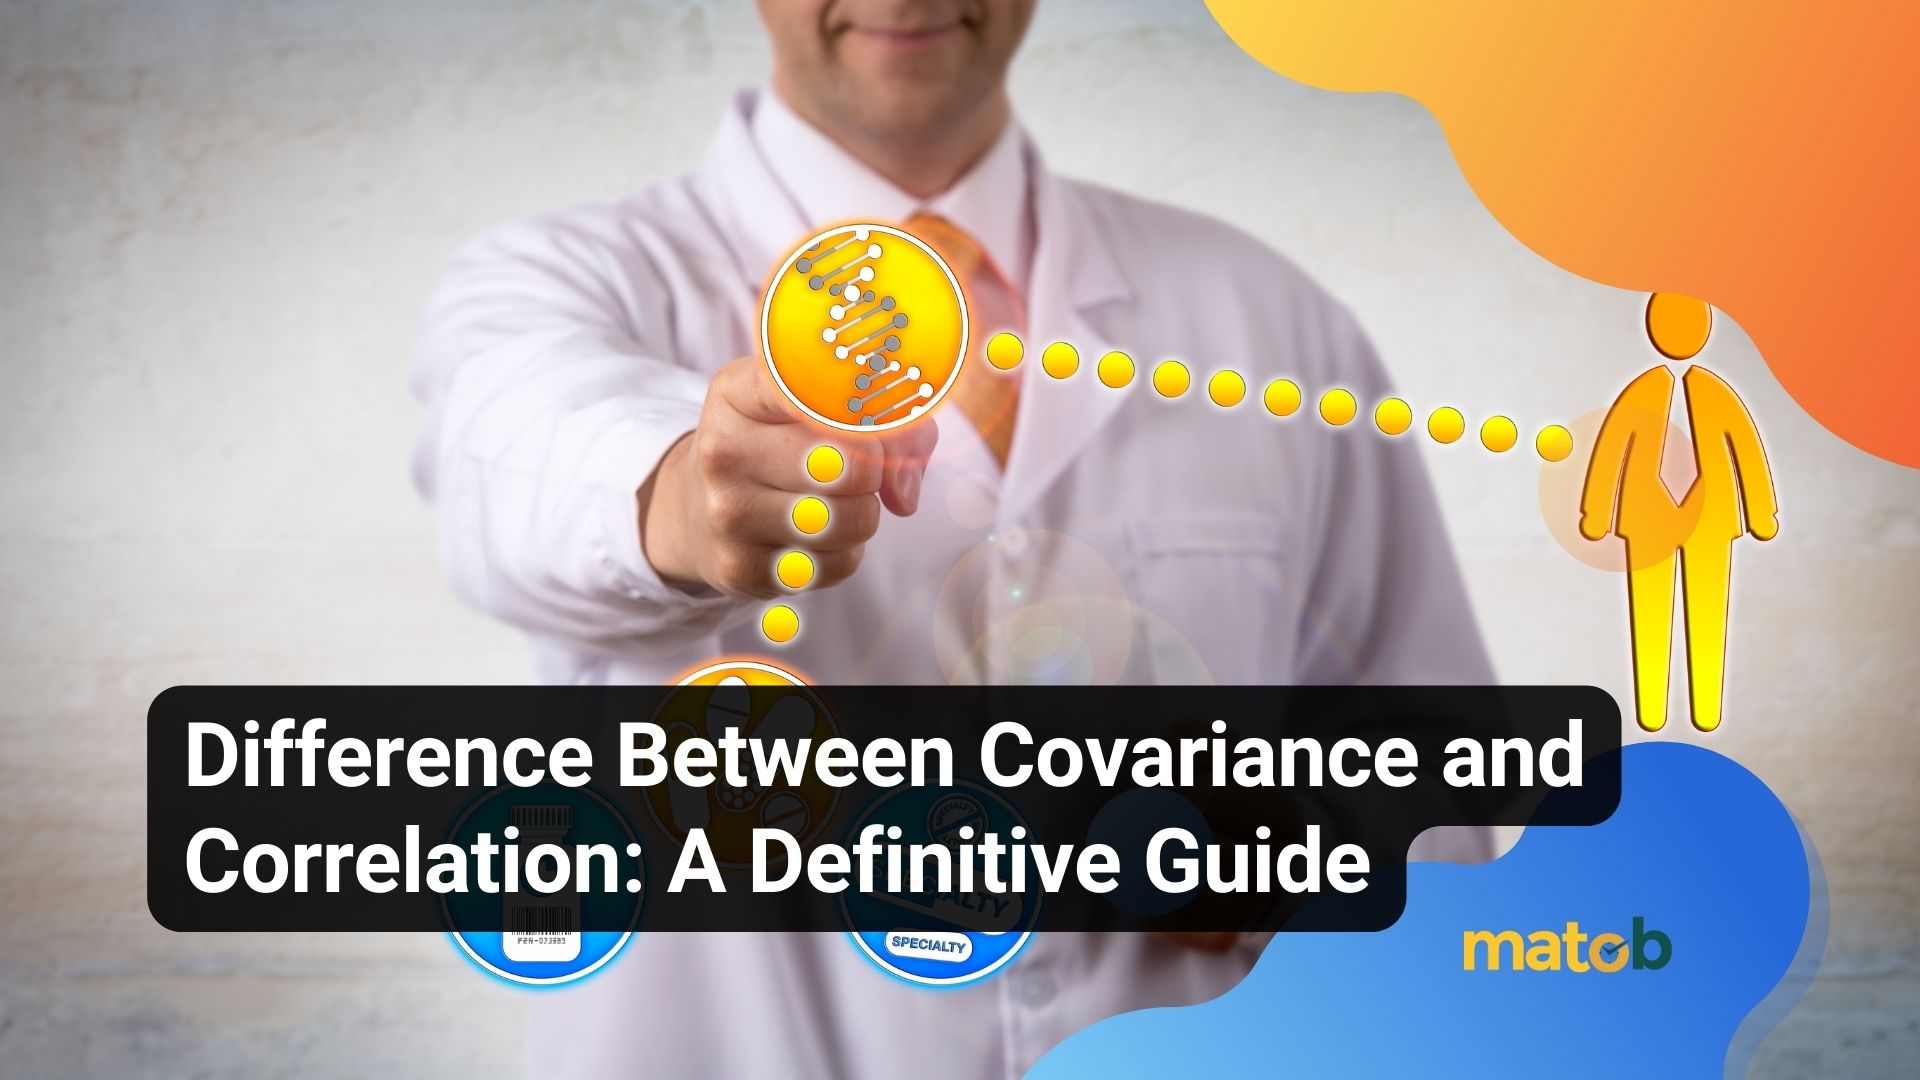 Difference Between Covariance and Correlation: A Definitive Guide